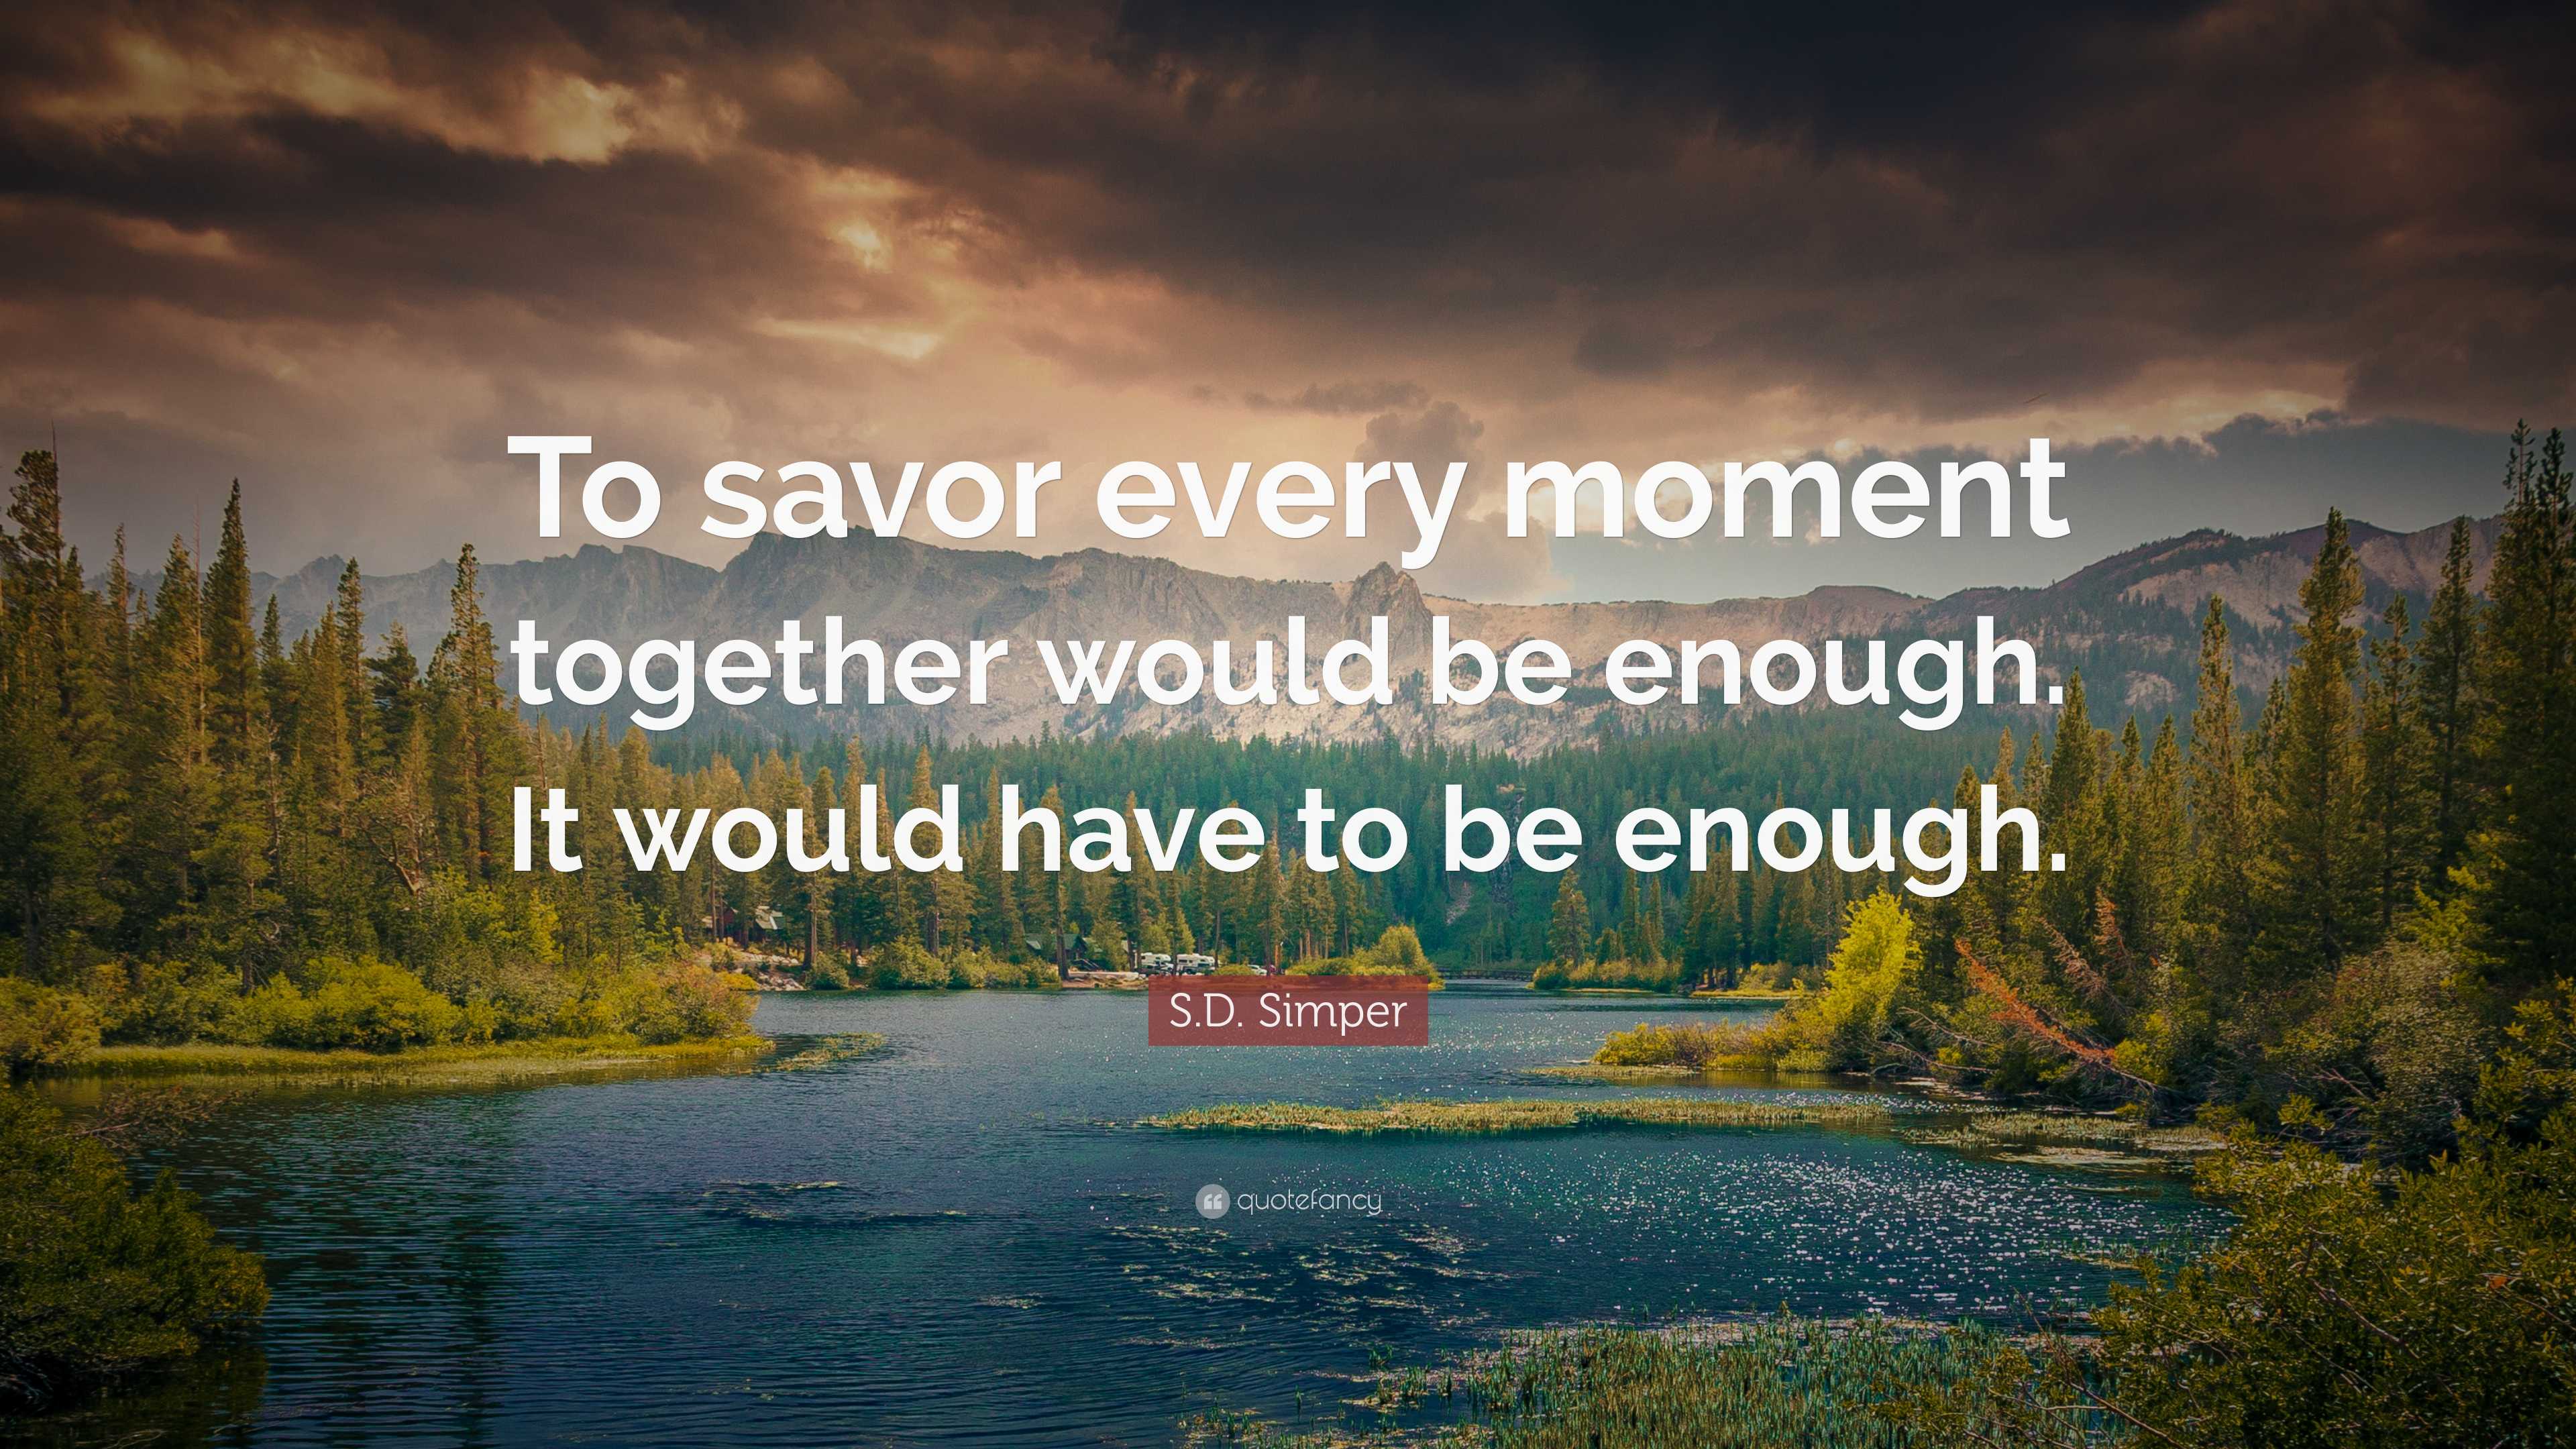 S.D. Simper Quote: “To savor every moment together would be enough